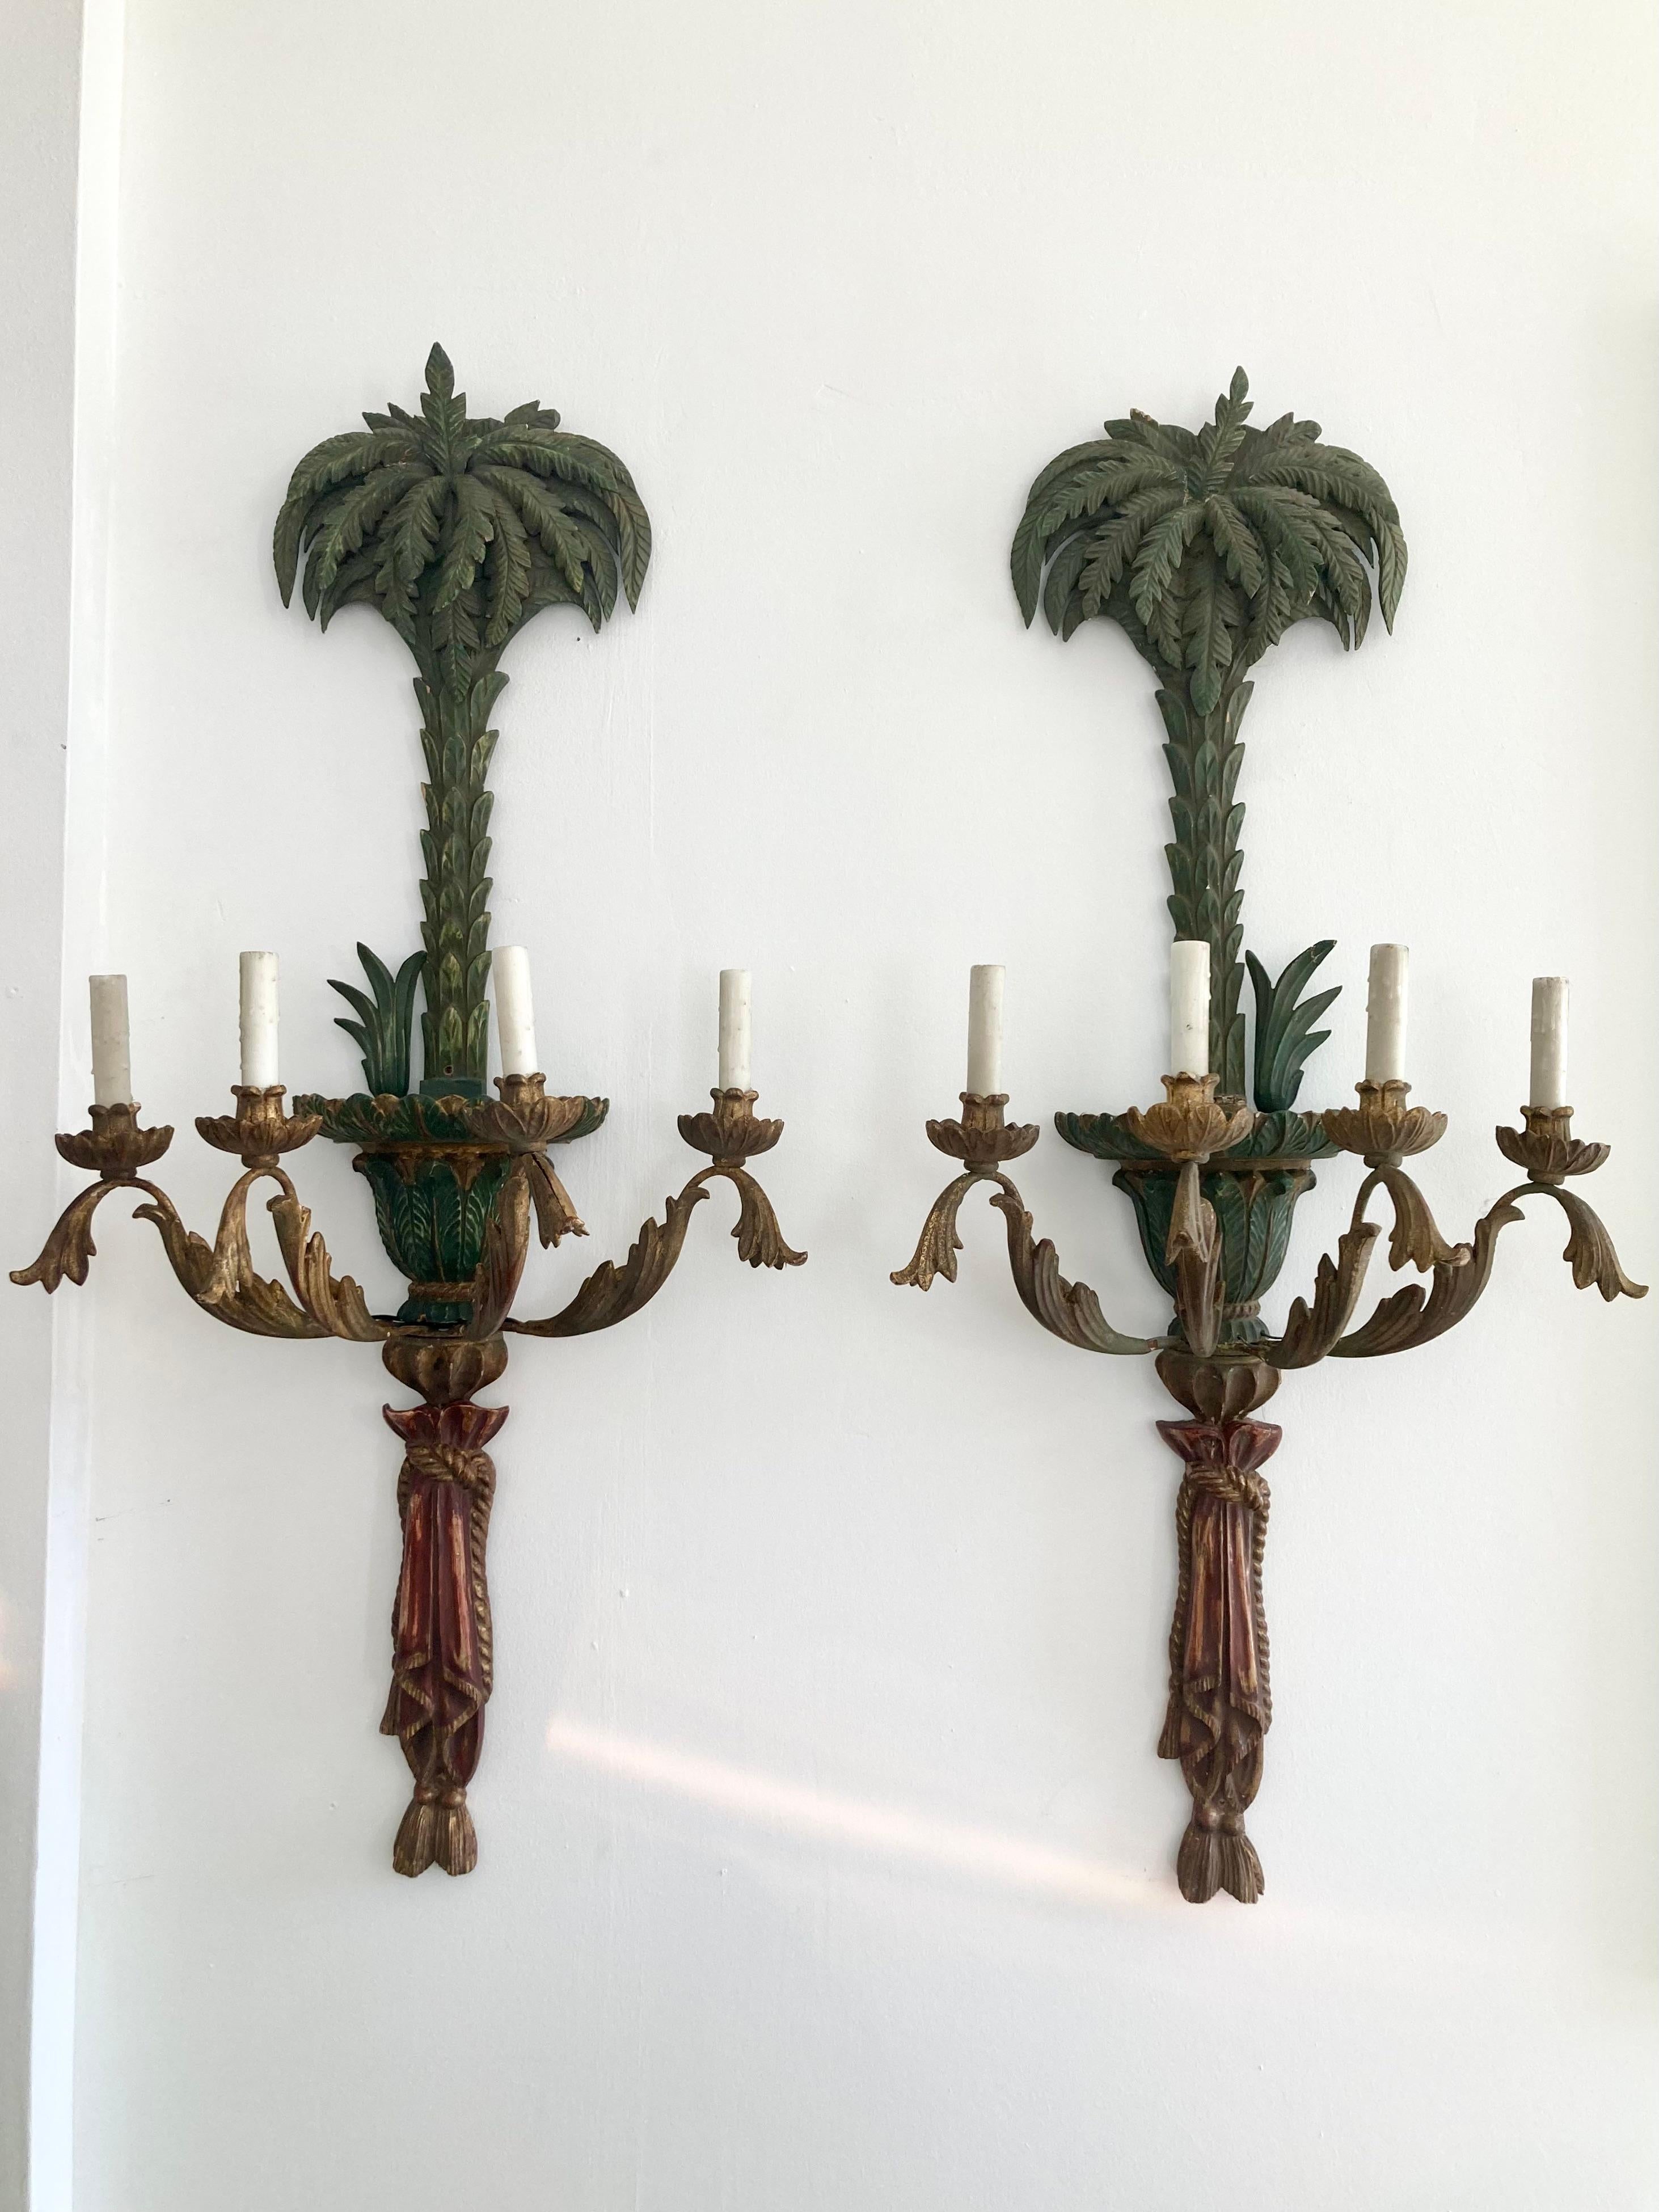 Beautiful pair of Italian carved wood palm tree wall sconces. Incredible details. The wiring goes out the back in the center so you will need an electrician to install. Add some real Hollywood Glamour to your home. We have a second pair available so